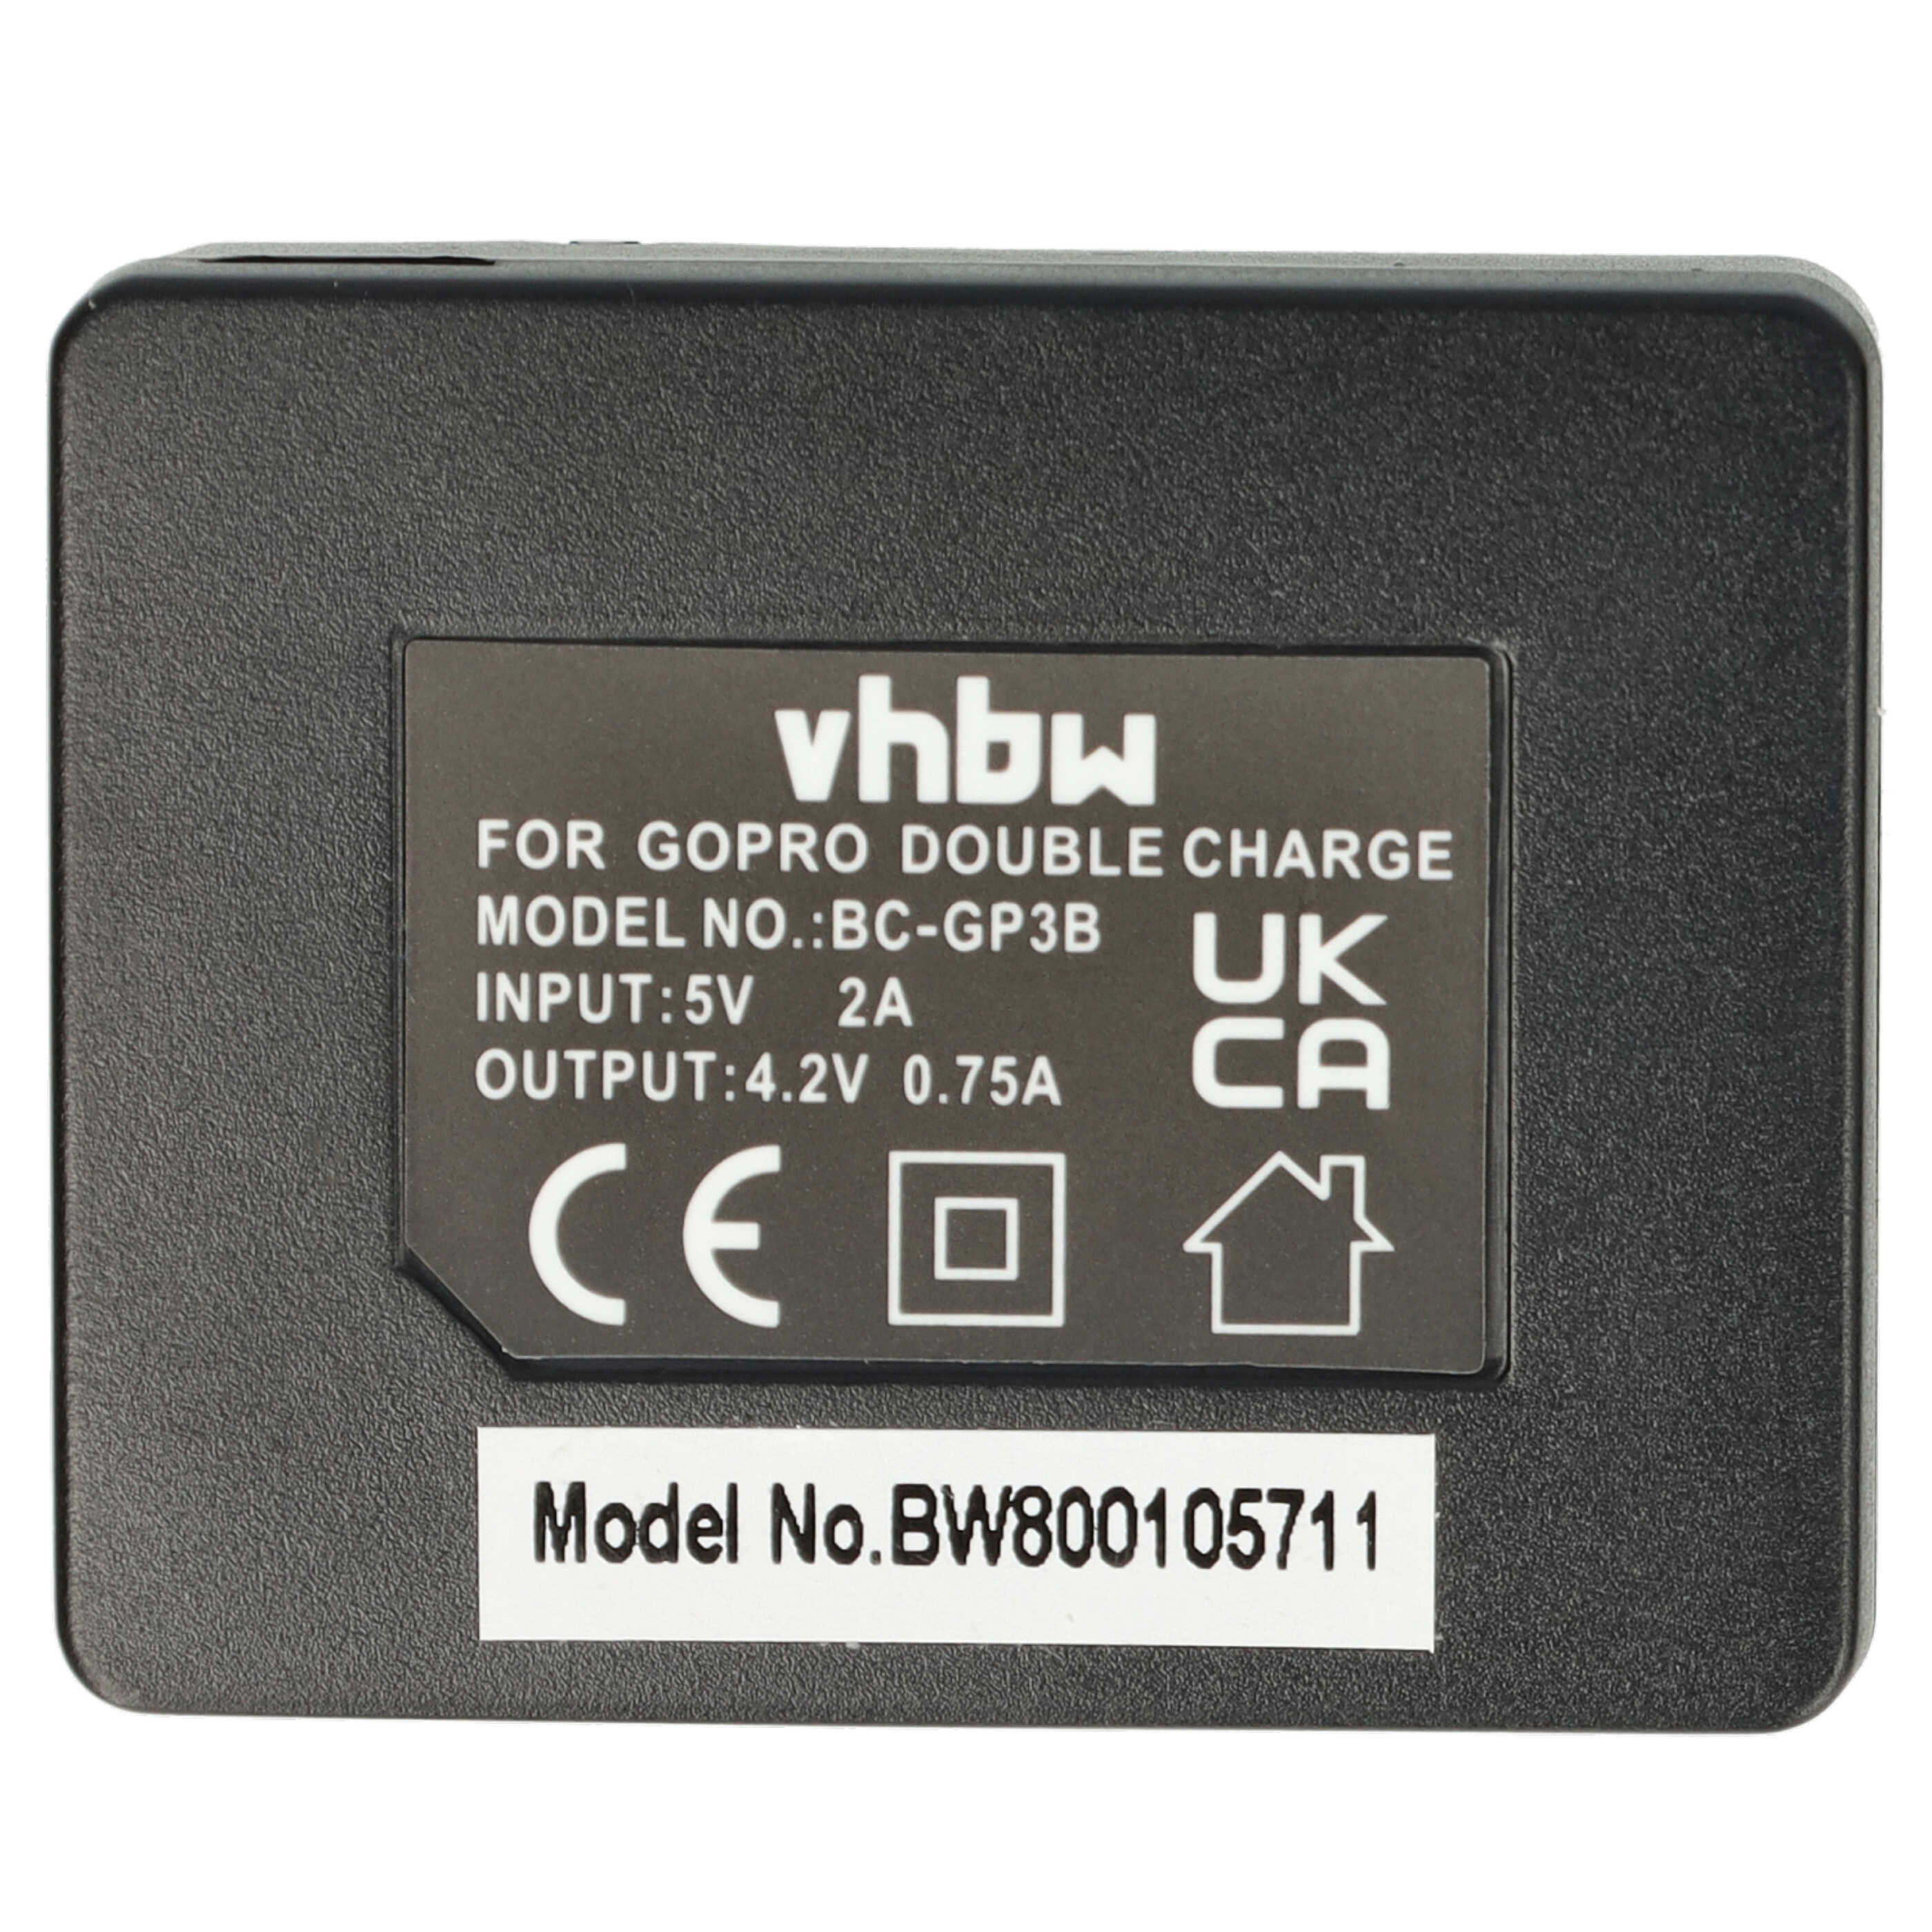 vhbw Charger Set for GoPro / Hero 3 Action Camera - 2x Battery + Dual-Charger